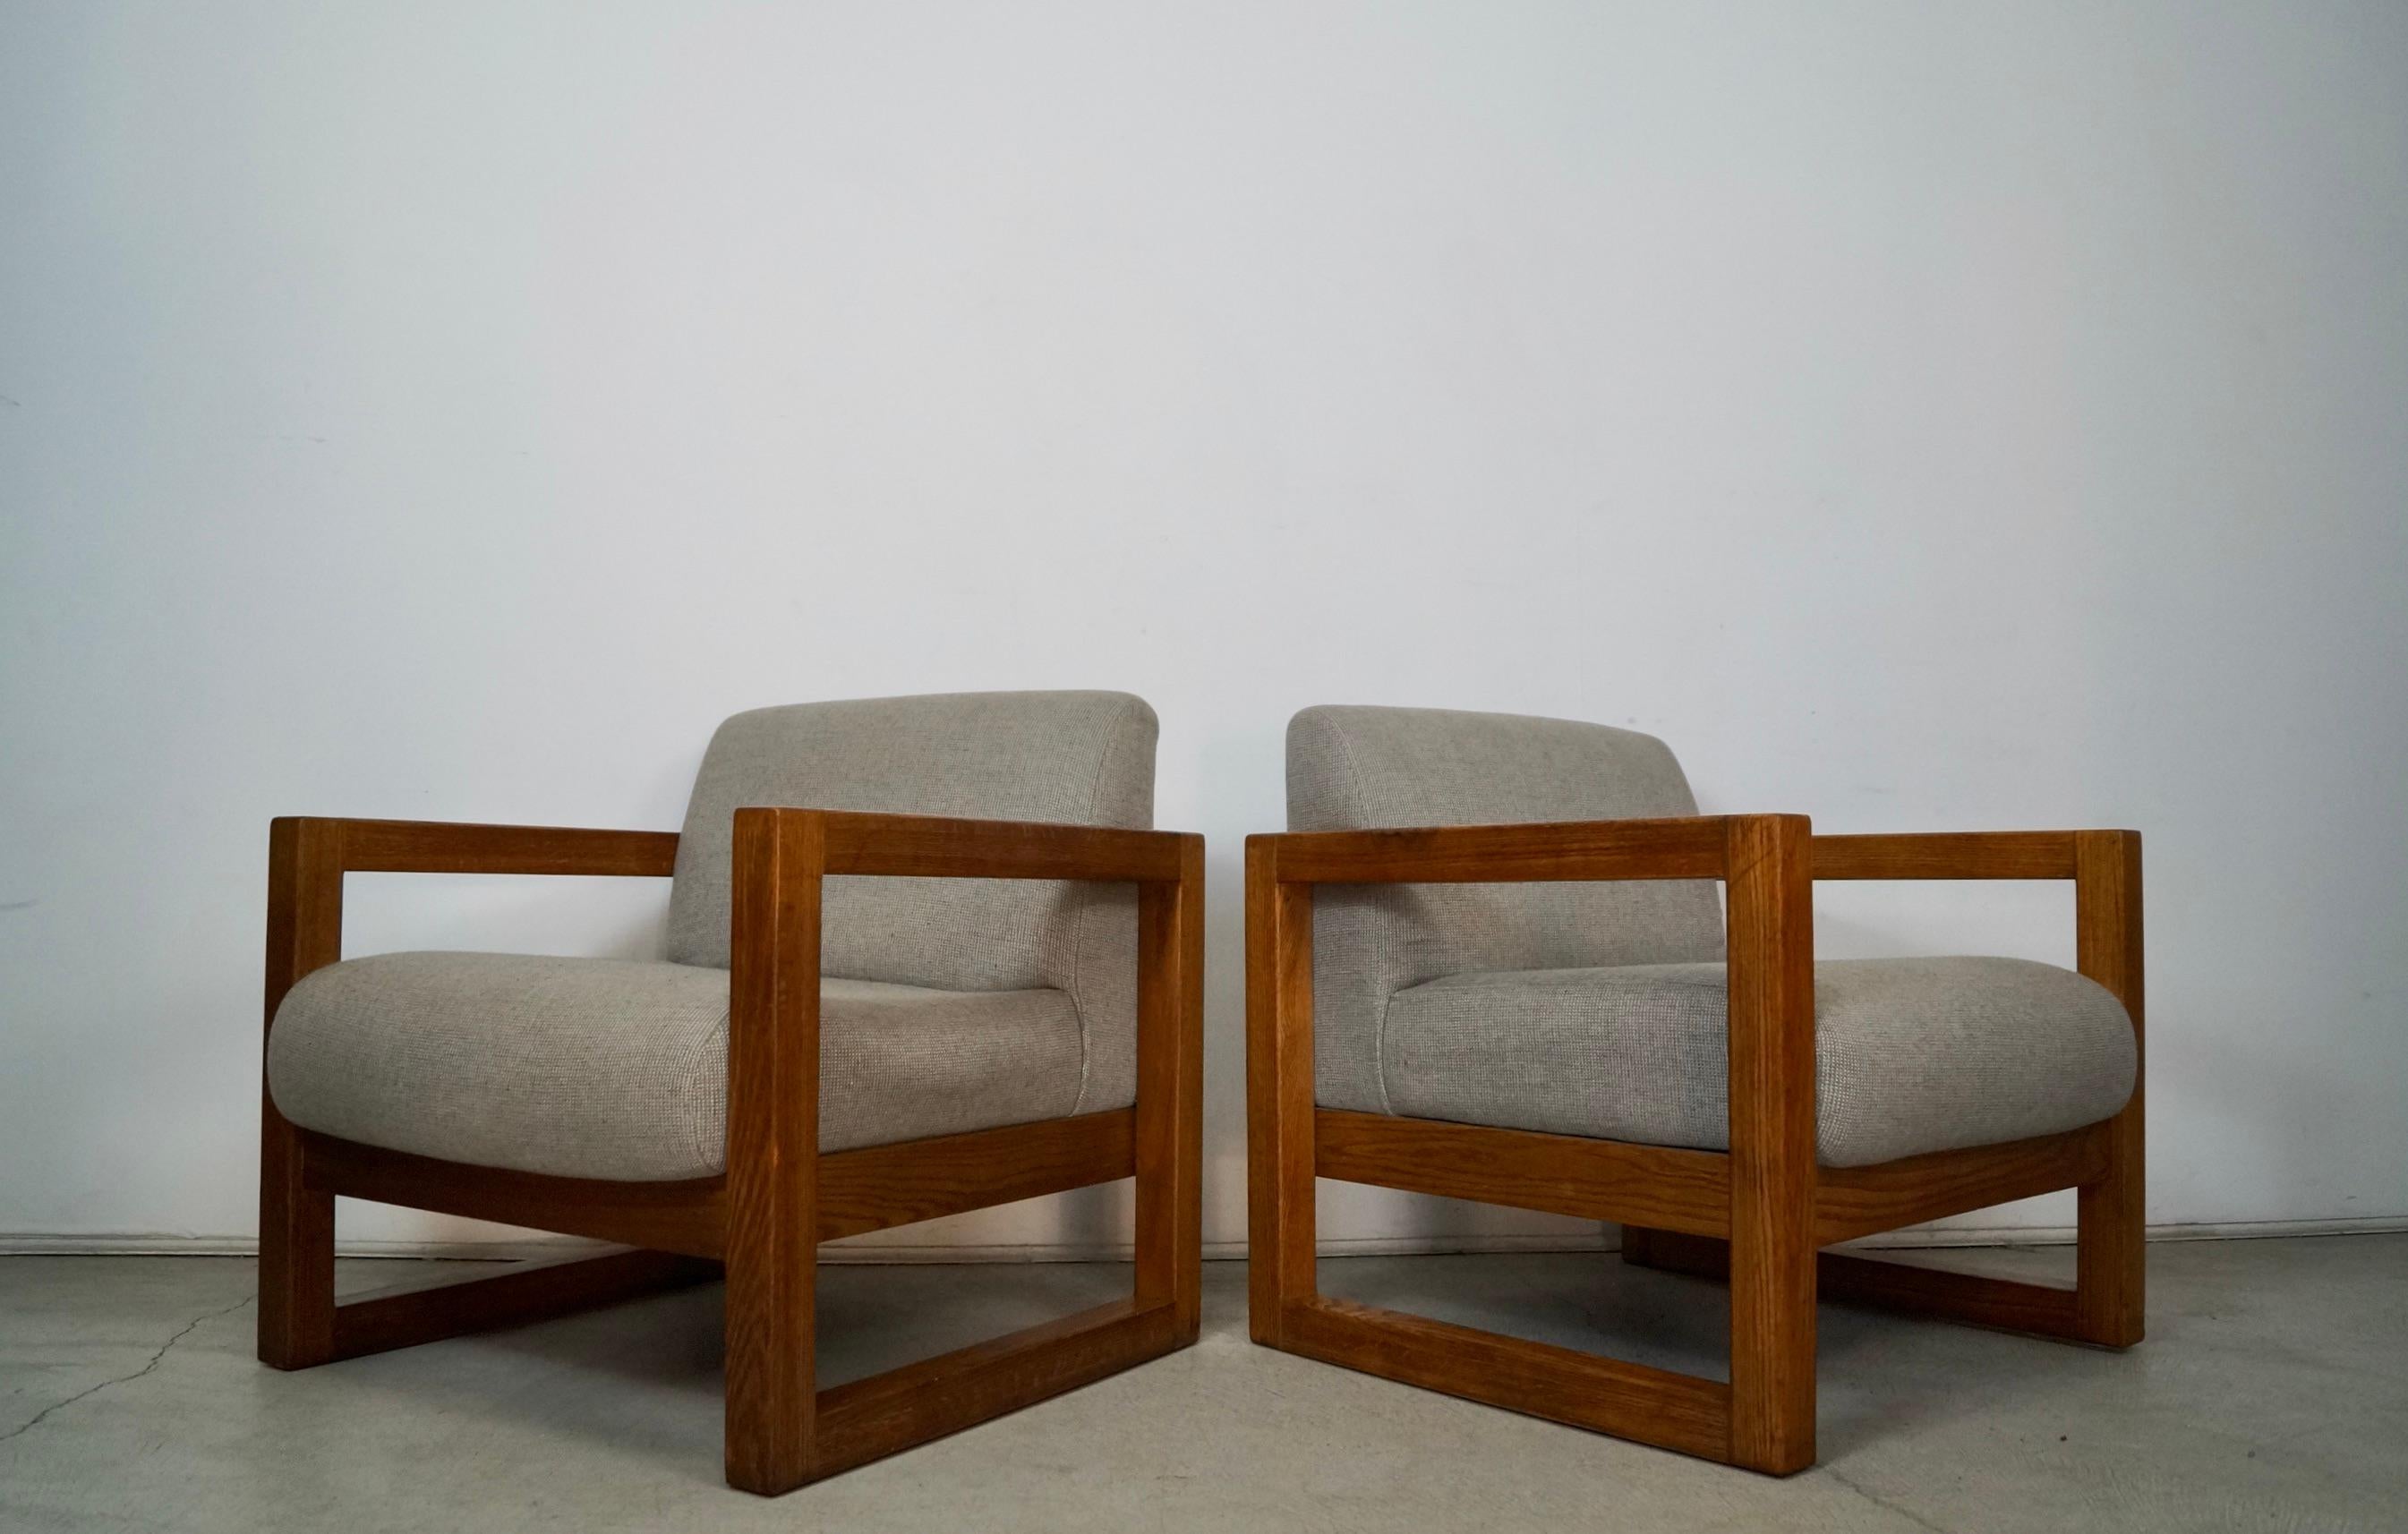 Pair of vintage Mid century Modern lounge chairs for sale. They were manufactured here in the US, and were made by High Point Furniture Industries. They have a solid oak frame in a cube shape, and have the original finish in great vintage condition.